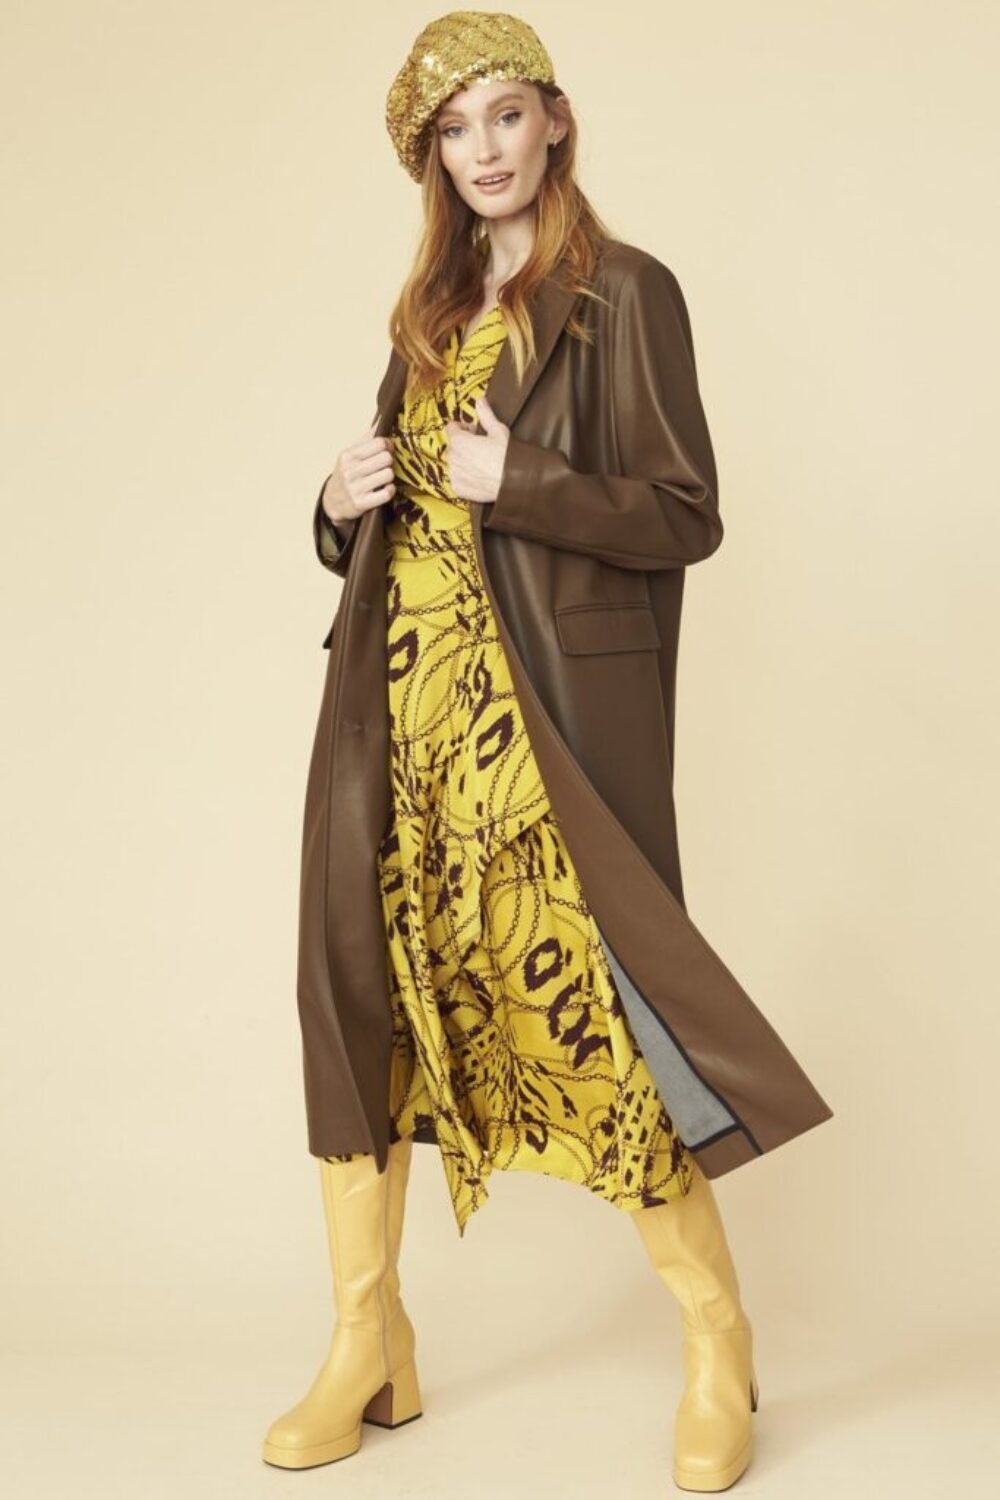 Shop Lux Chocolate Brown Eco Leather Trench Coat and women's luxury and designer clothes at www.lux-apparel.co.uk